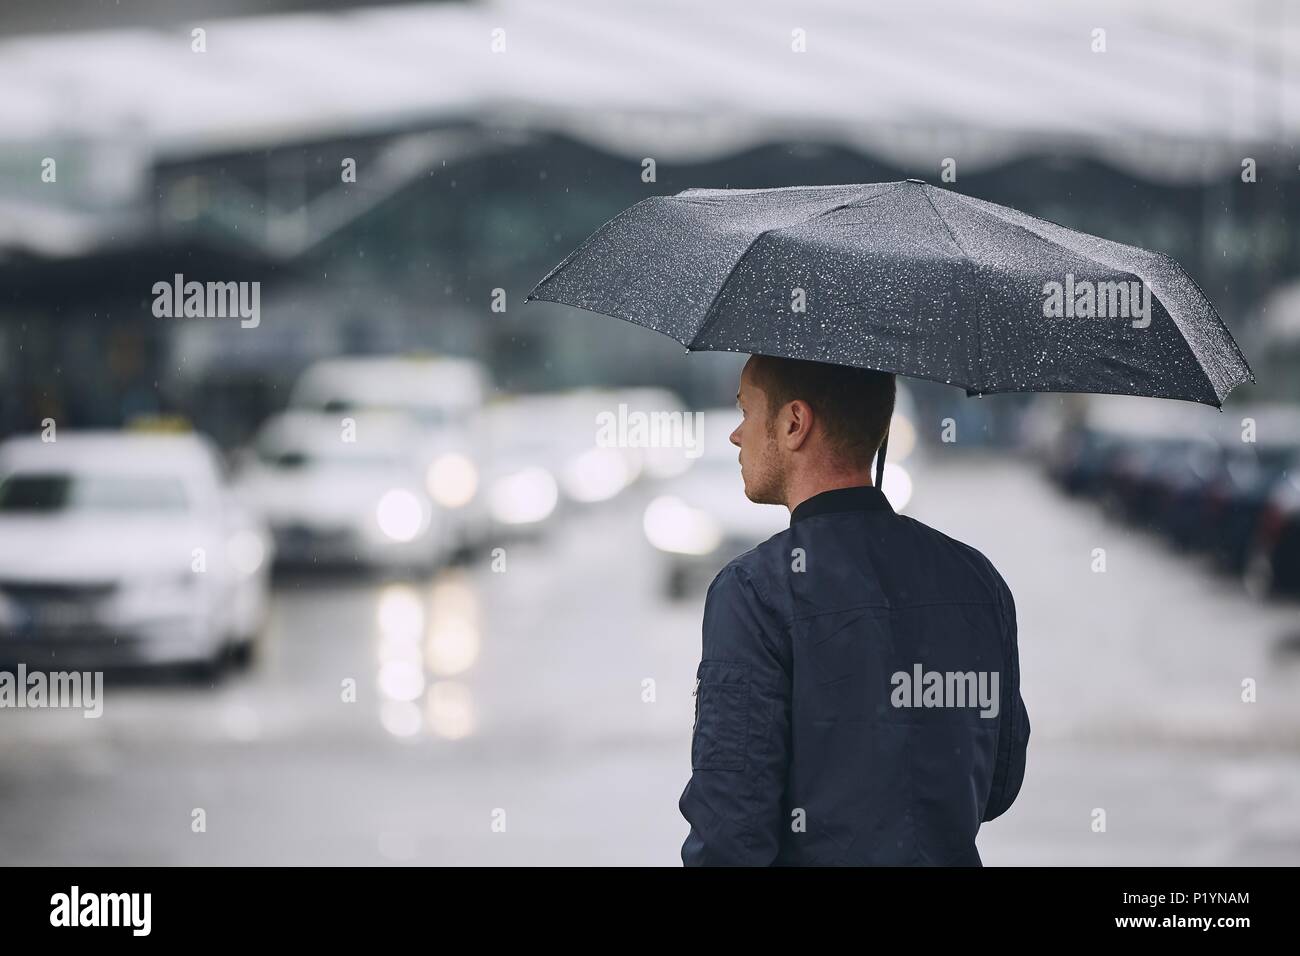 Rain in city. Young man holding umbrella walking in the street. Stock Photo